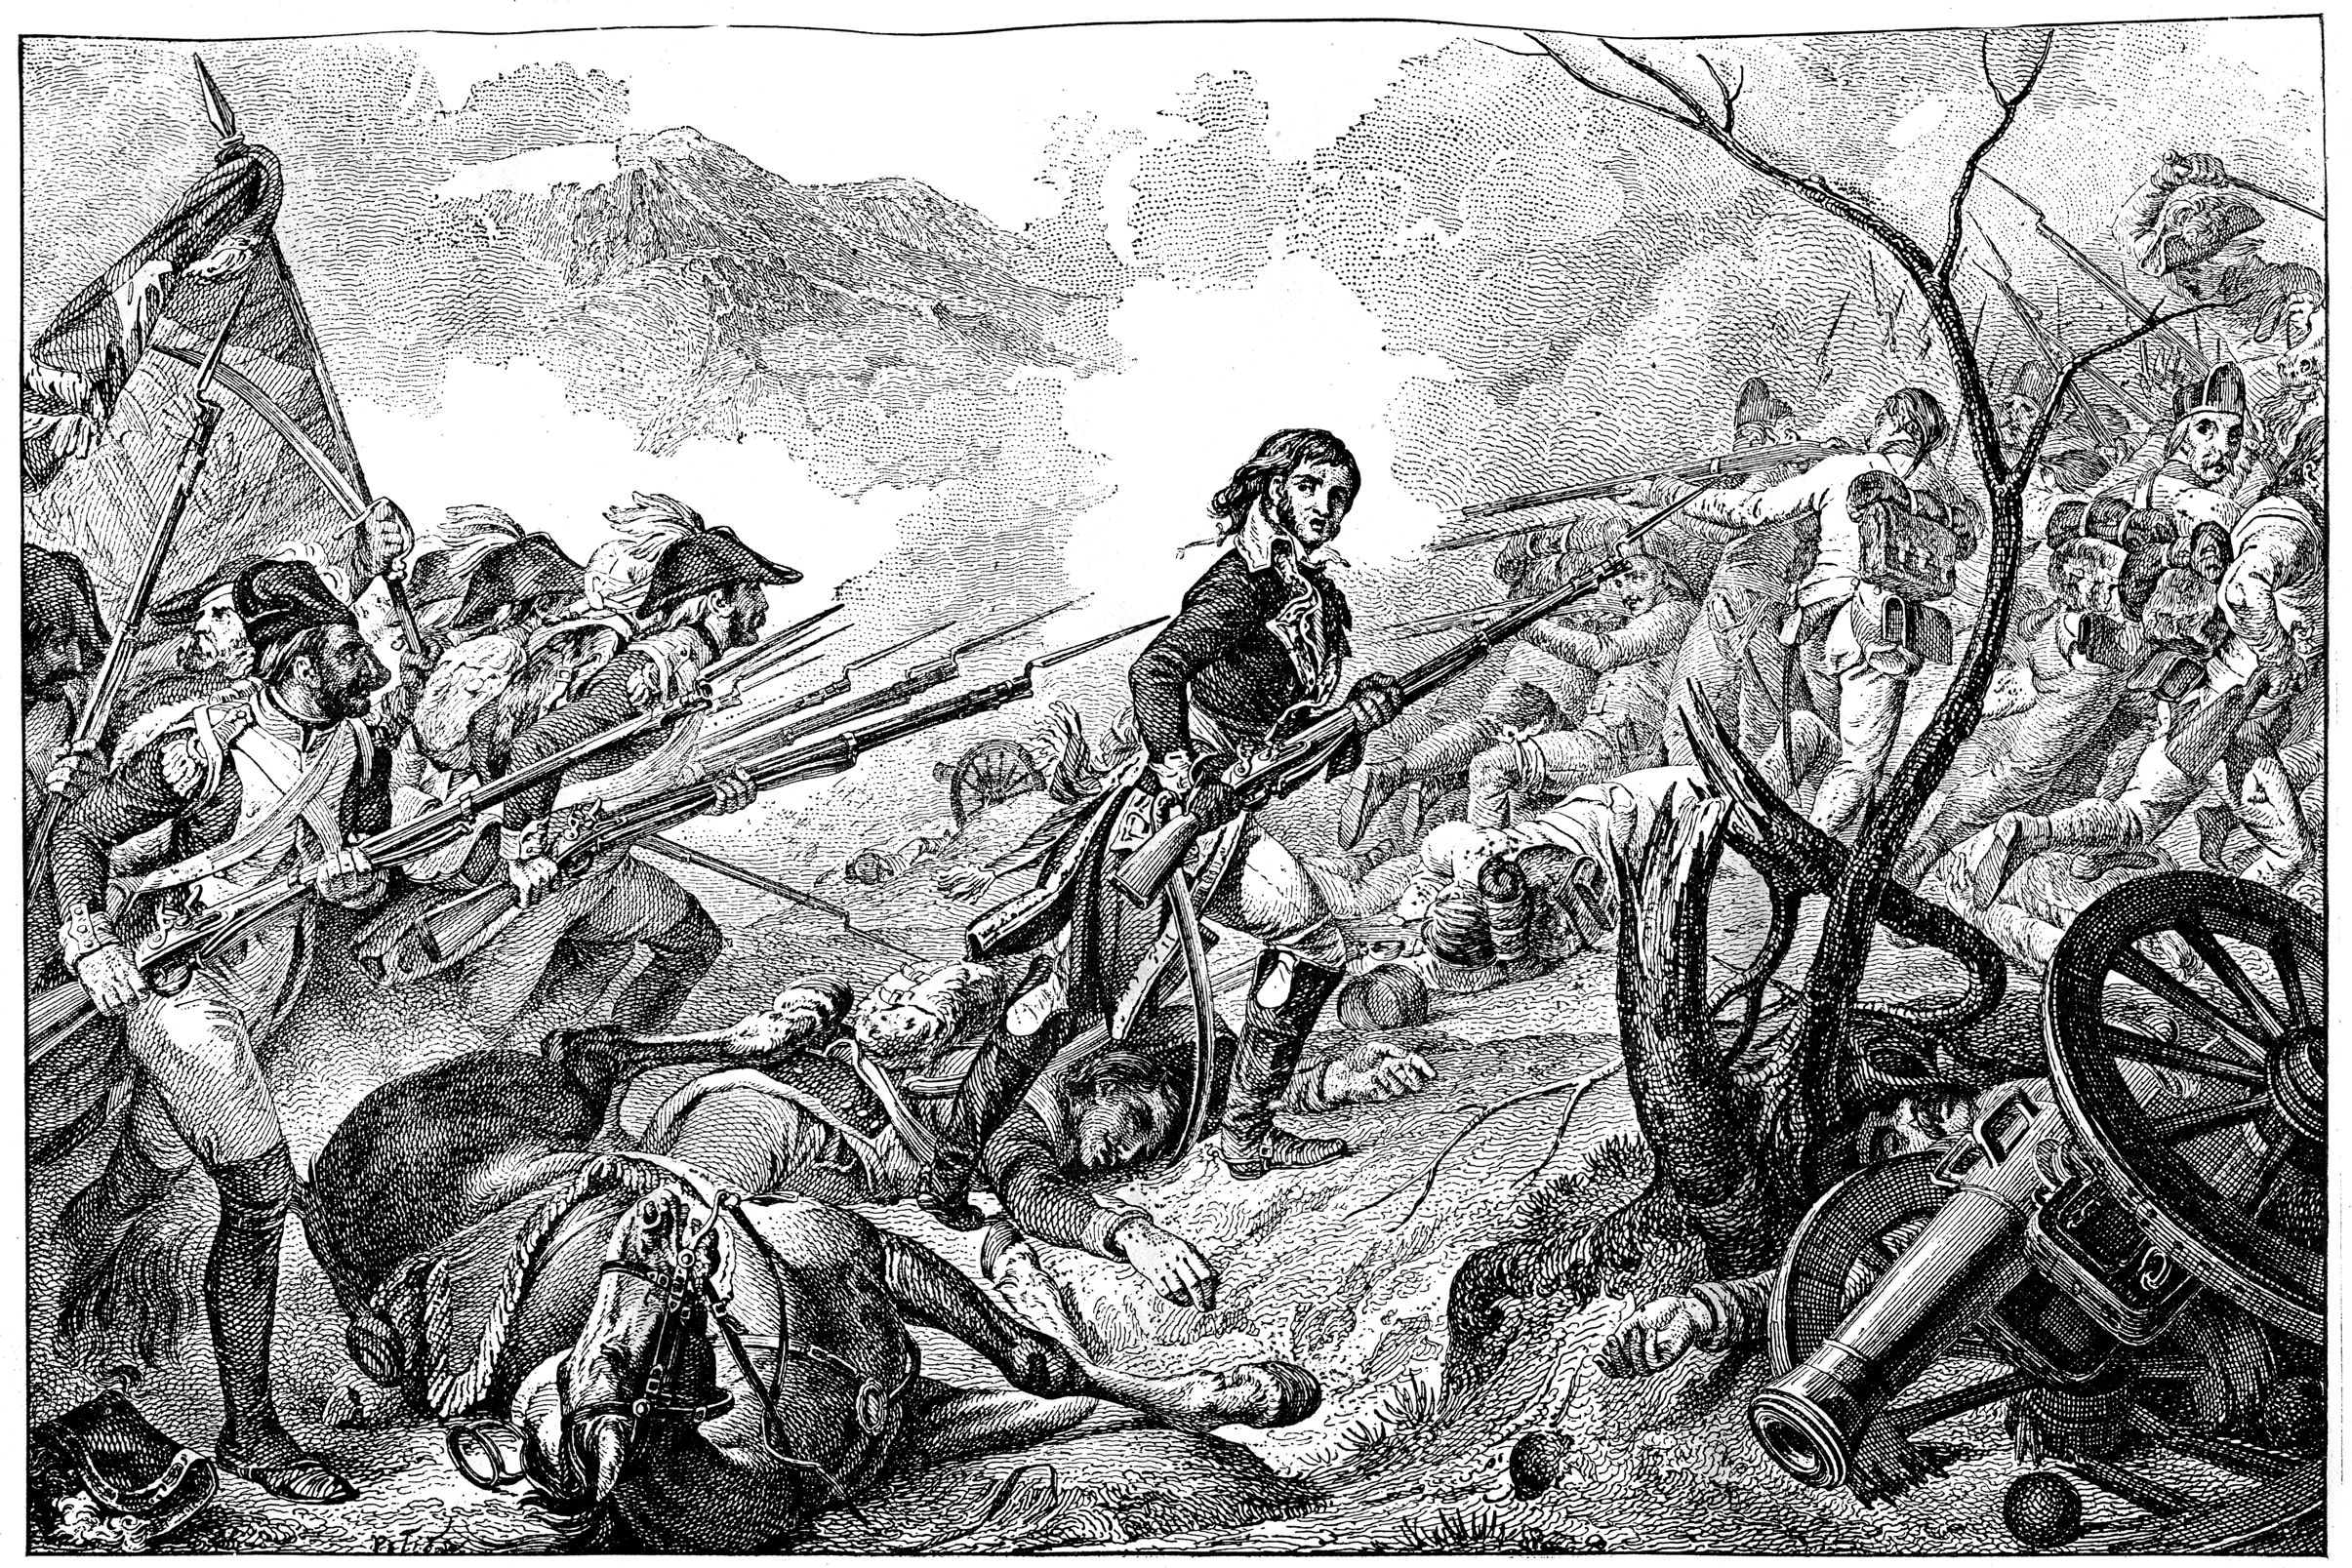 General Barthelemy Joubert leads his men in a charge against the wavering Austrians. Napoleon’s victory at the Battle of Rivoli forced the Austrians to abandon Lombardy and accept an unfavorable peace treaty.